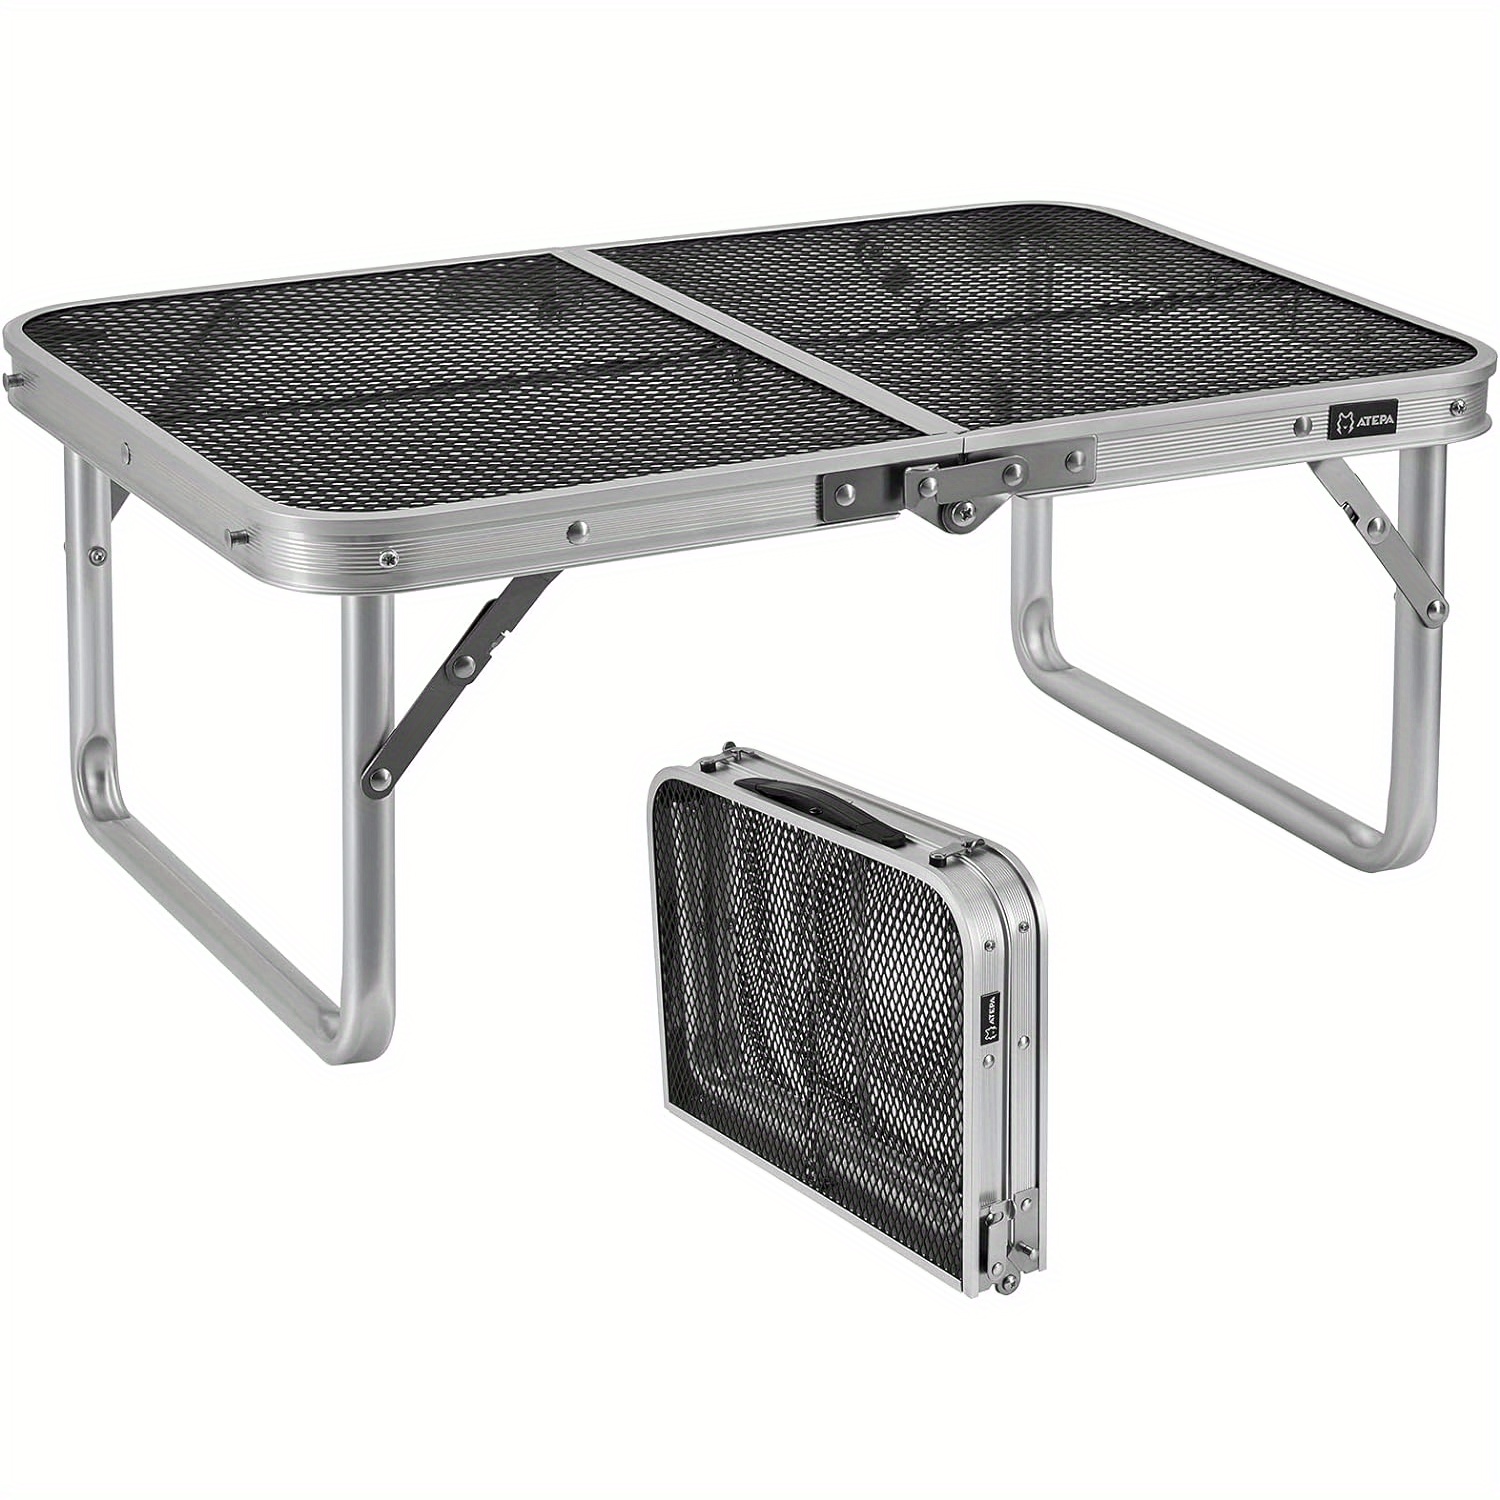 

Atepa Small Camping Steel Mesh Table Portable Grill Table Lightweight Folding Beach Table, Easy To Carry For Outside Beach Camping Cooking Bbq Rv Picnic